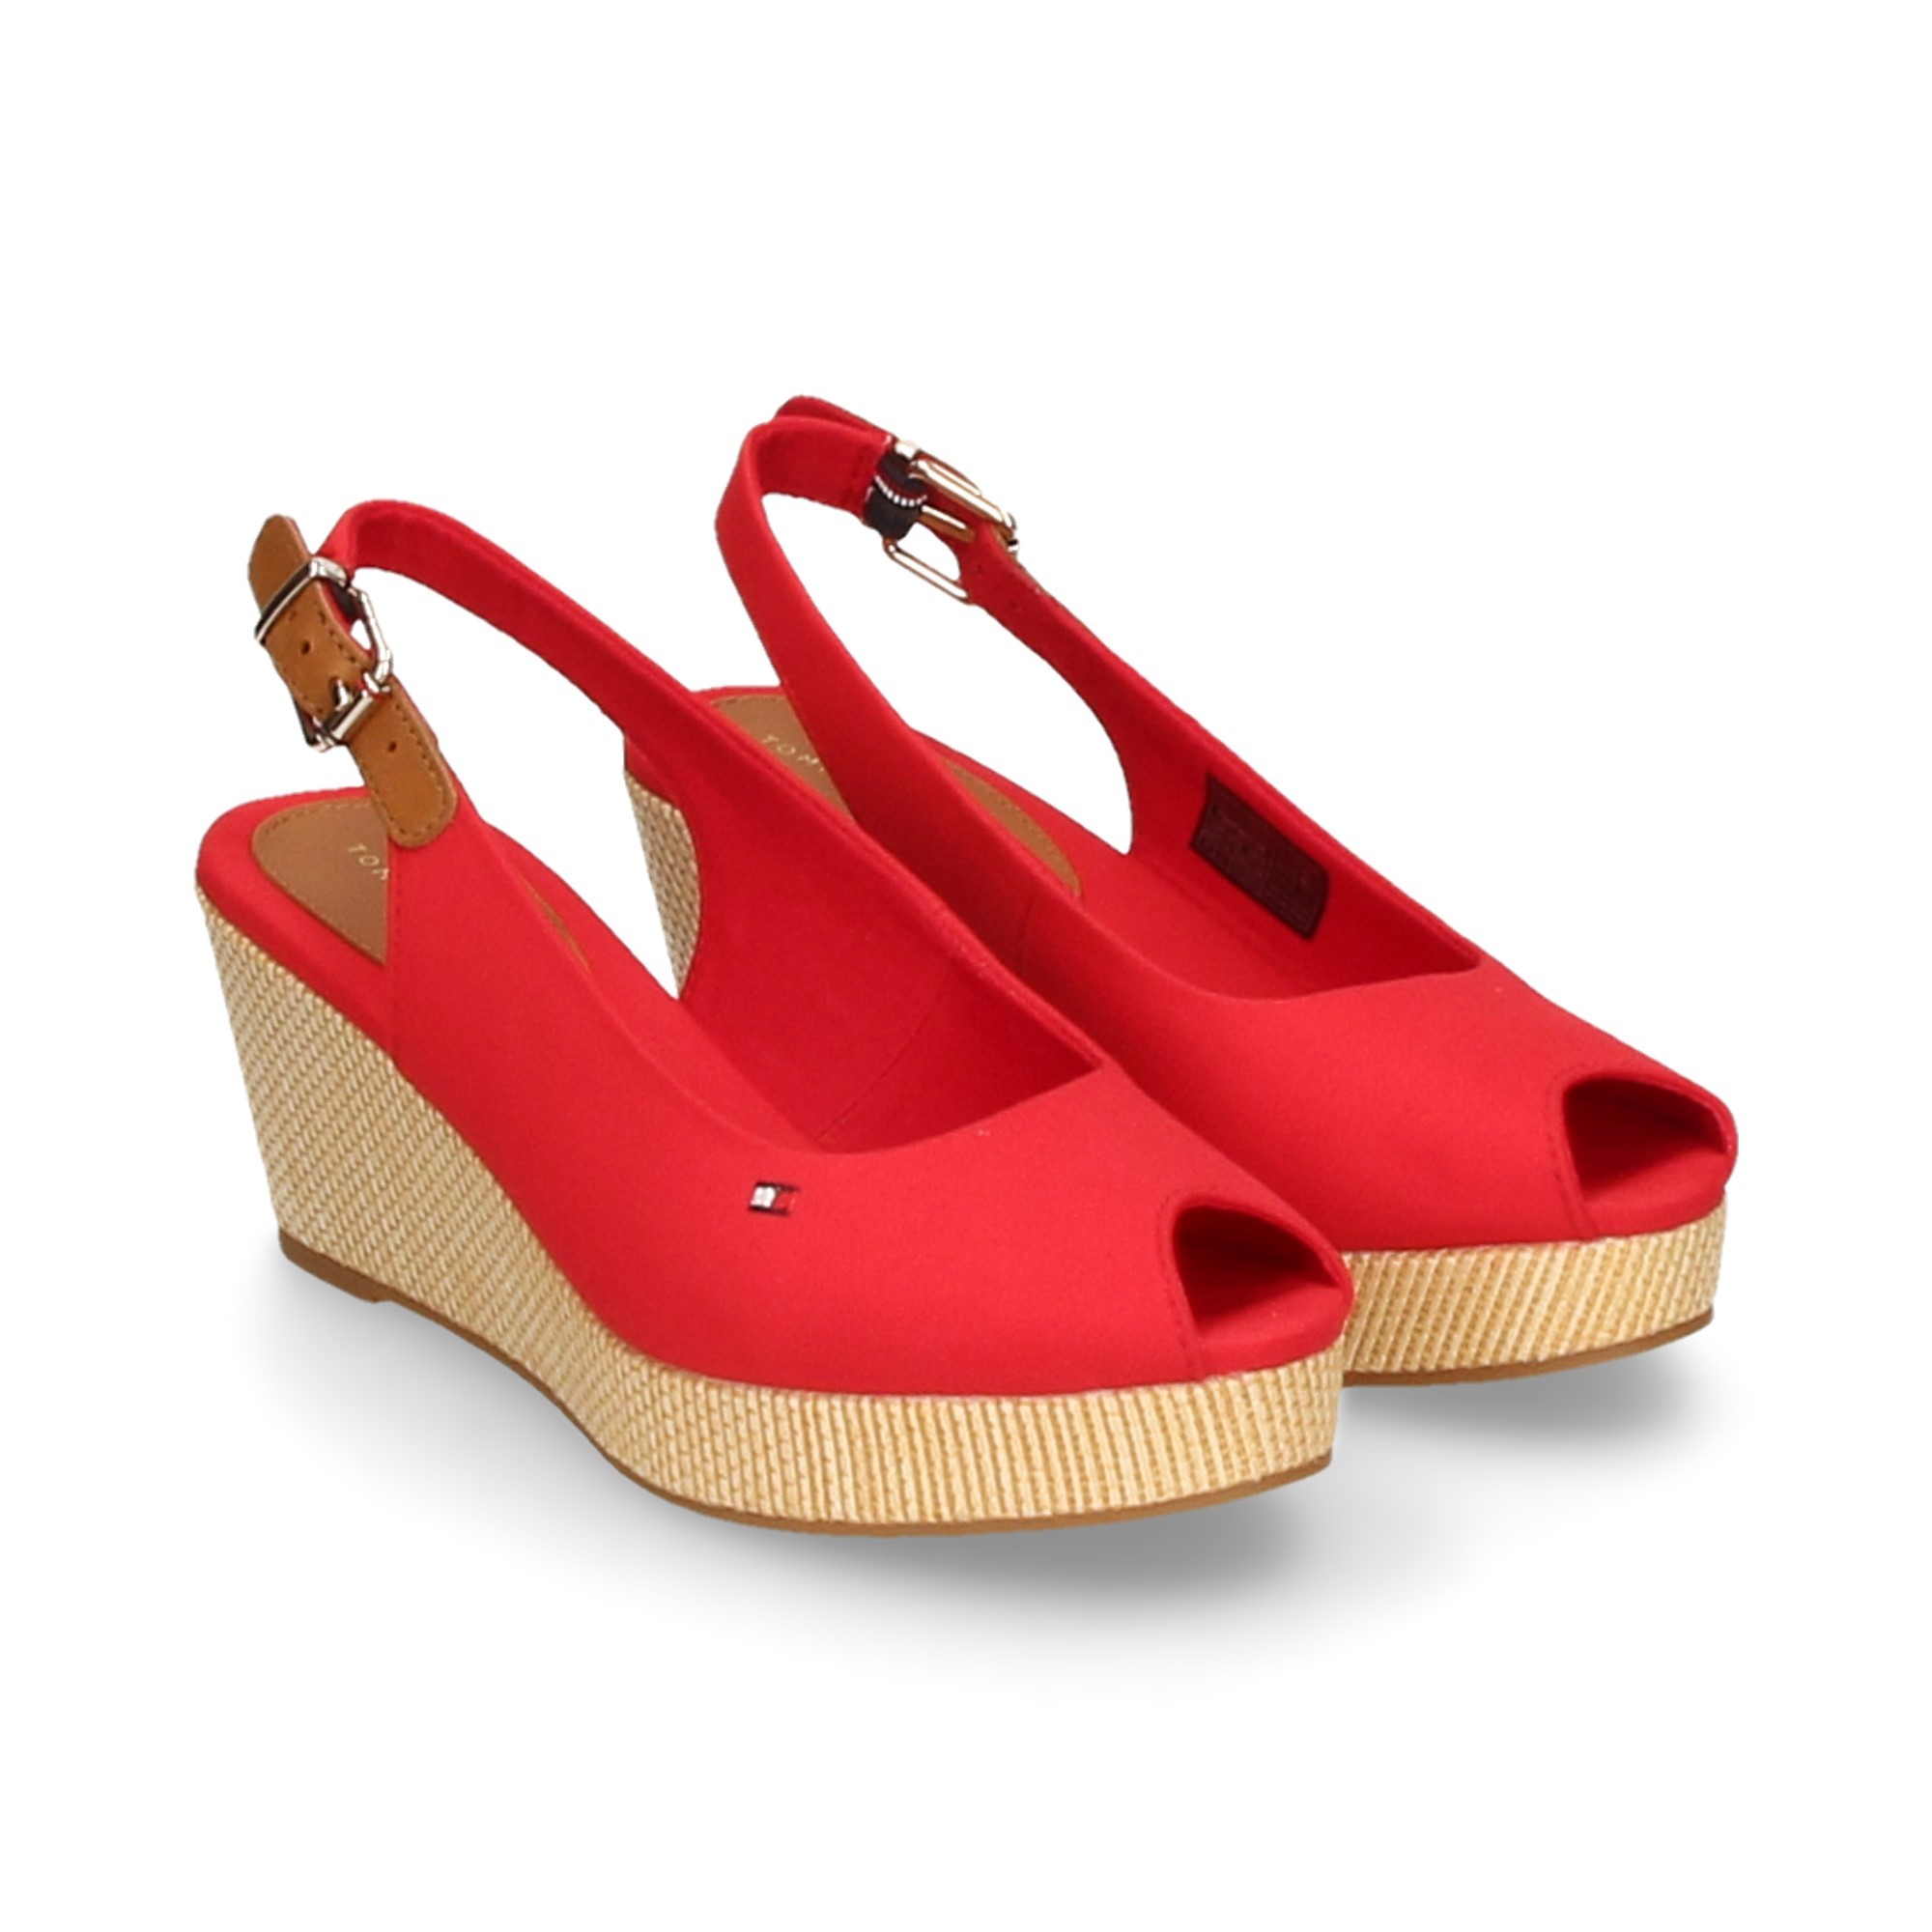 TOMMY HILFIGER Wedge shoes FW0FW04788 